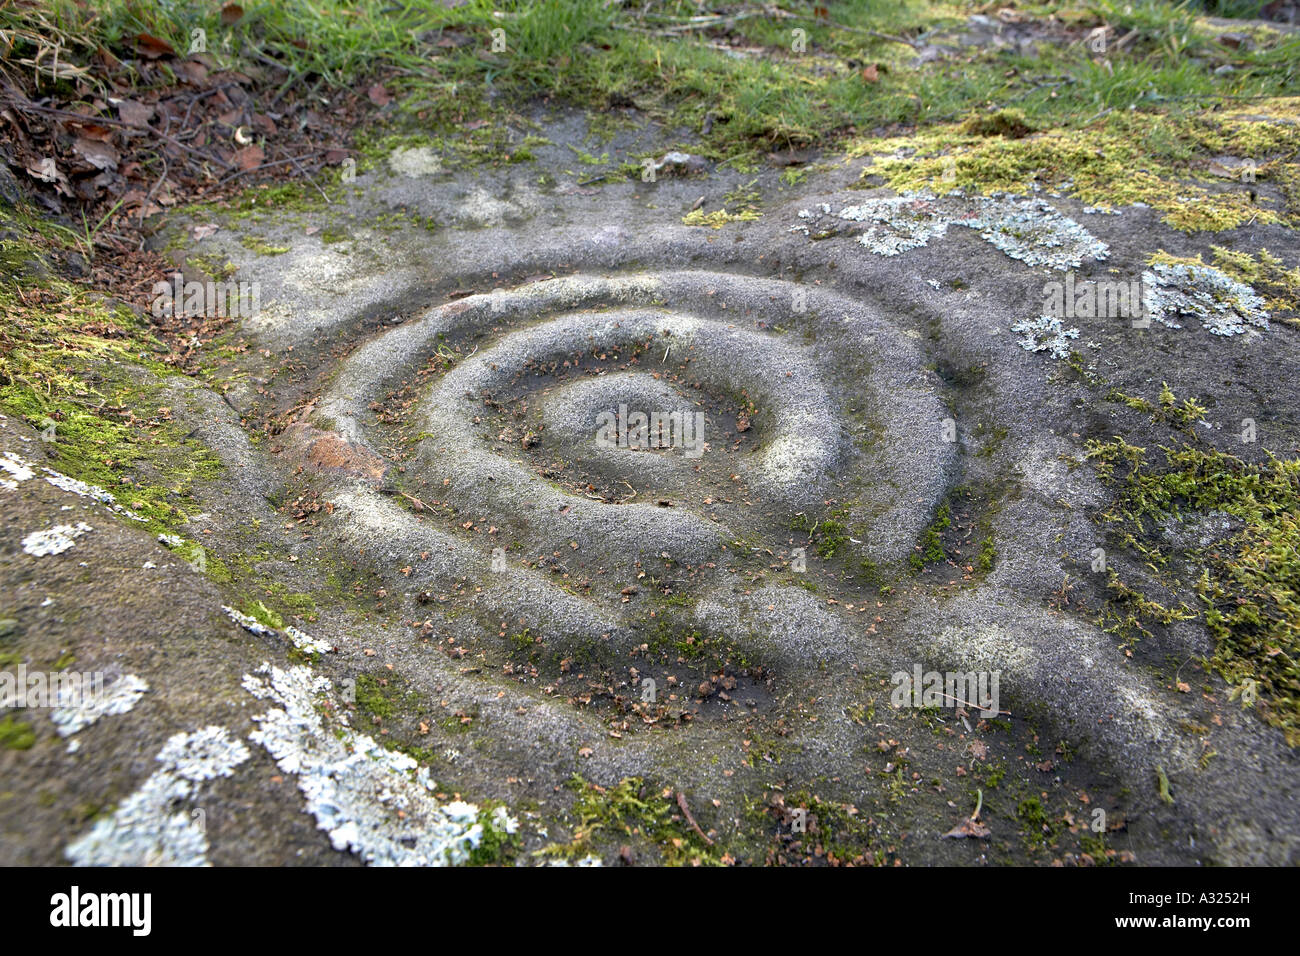 Cup and ring marks Prehistoric rock art Routin Roughting Roughtling Lynn  Stock Photo - Alamy